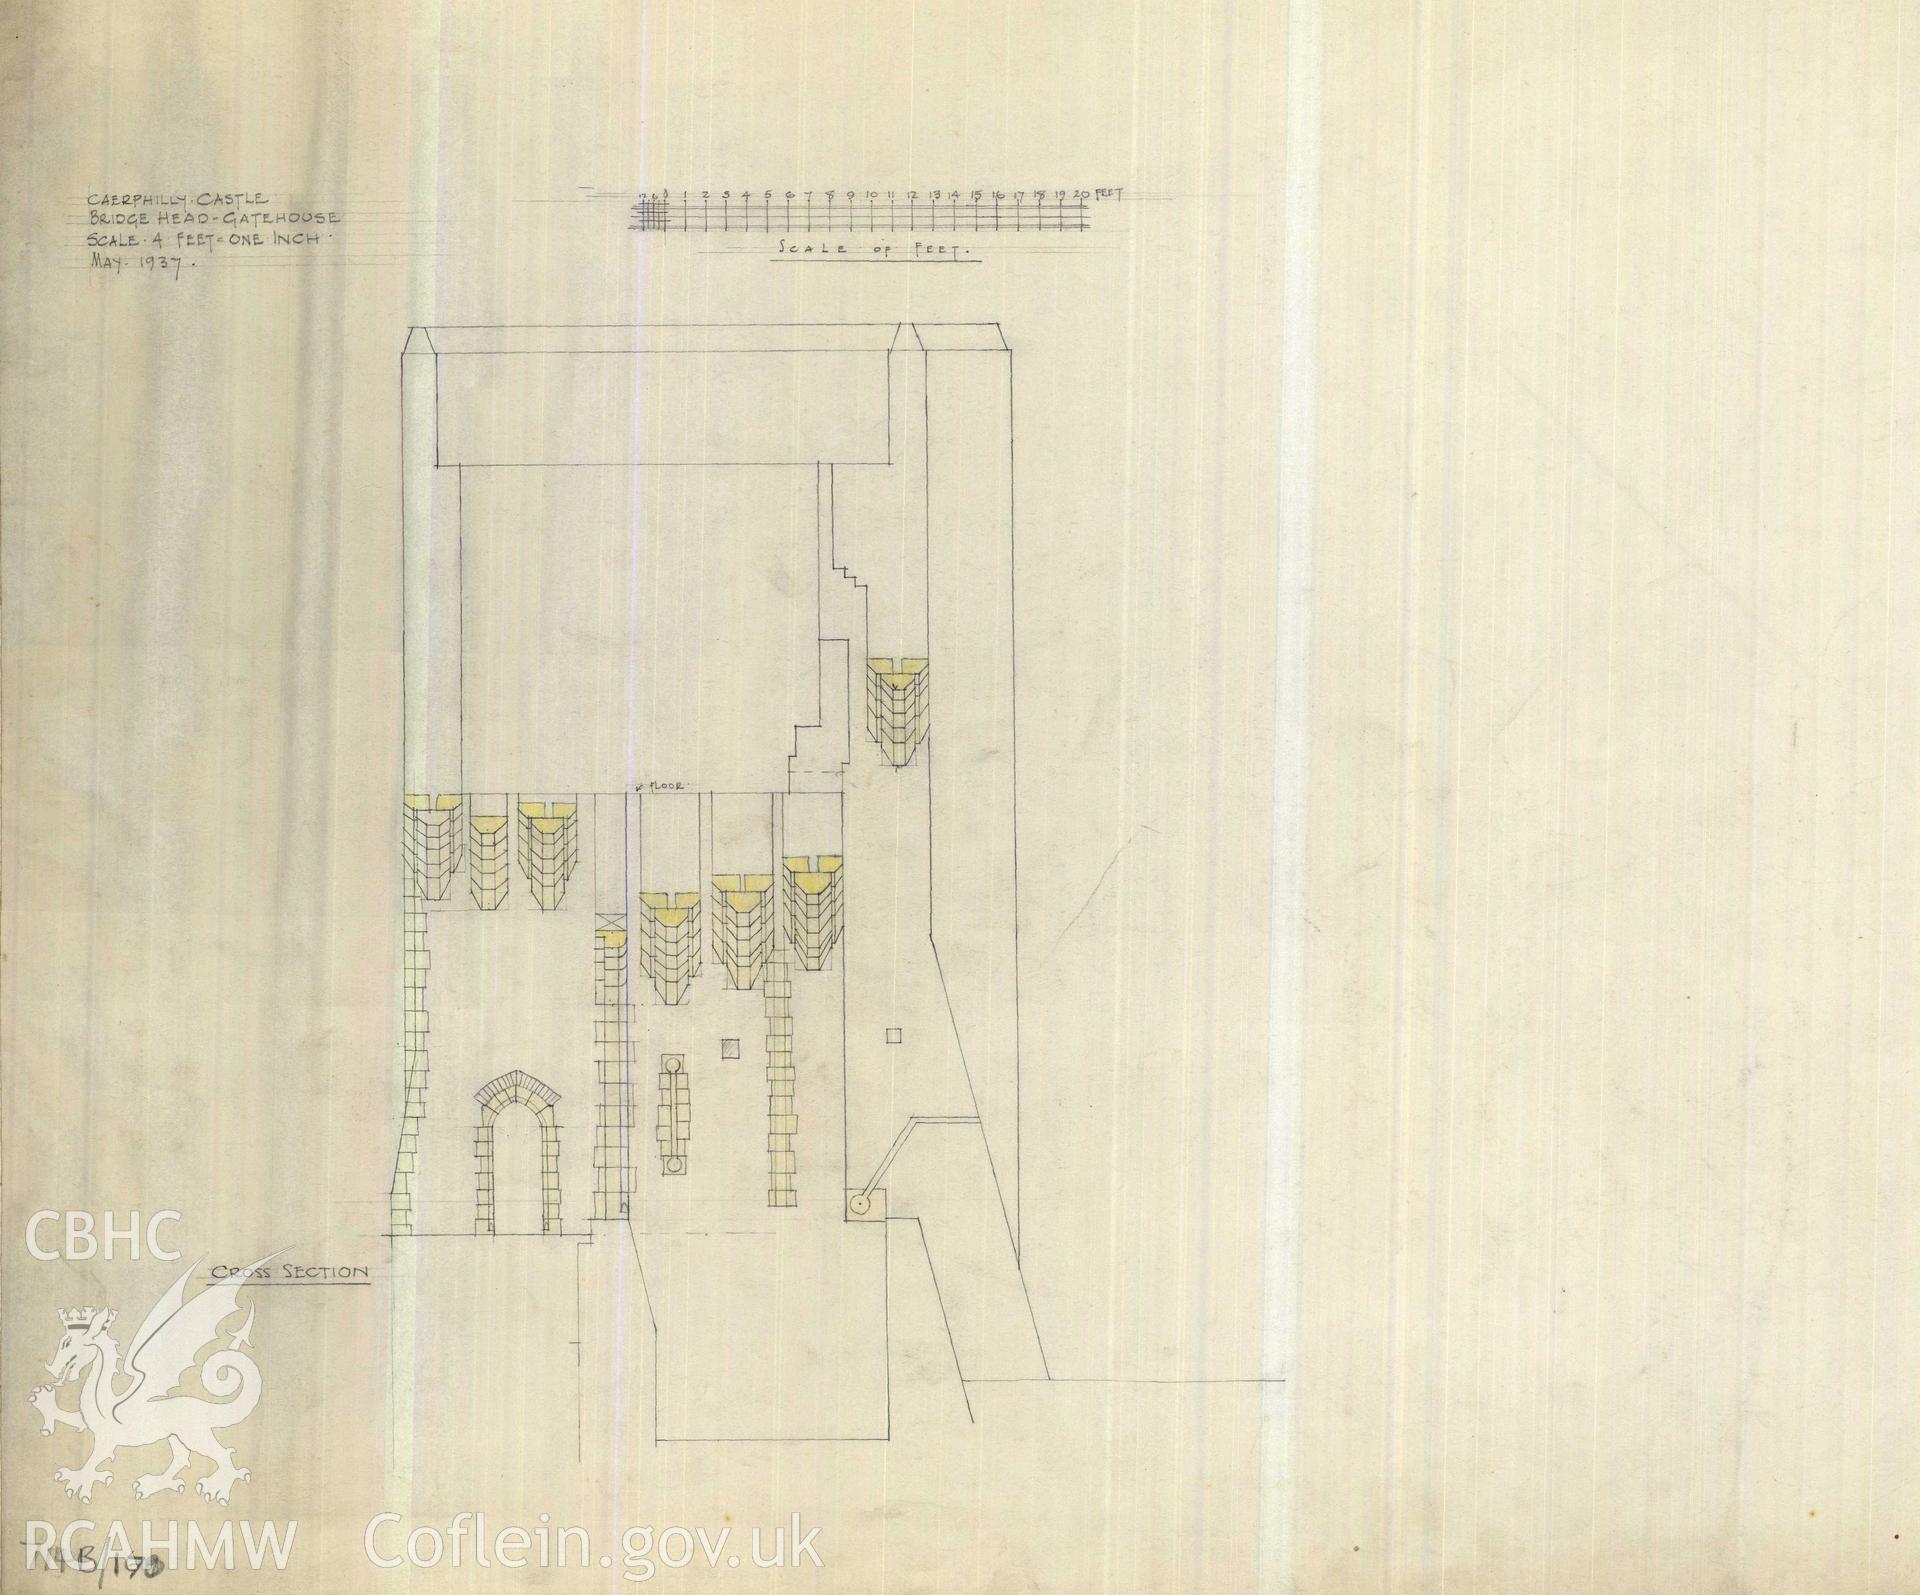 Cadw guardianship monument drawing of Caerphilly Castle. Dam, S gate, section, recons (ii). Cadw Ref. No:714B/170. Scale 1:48.